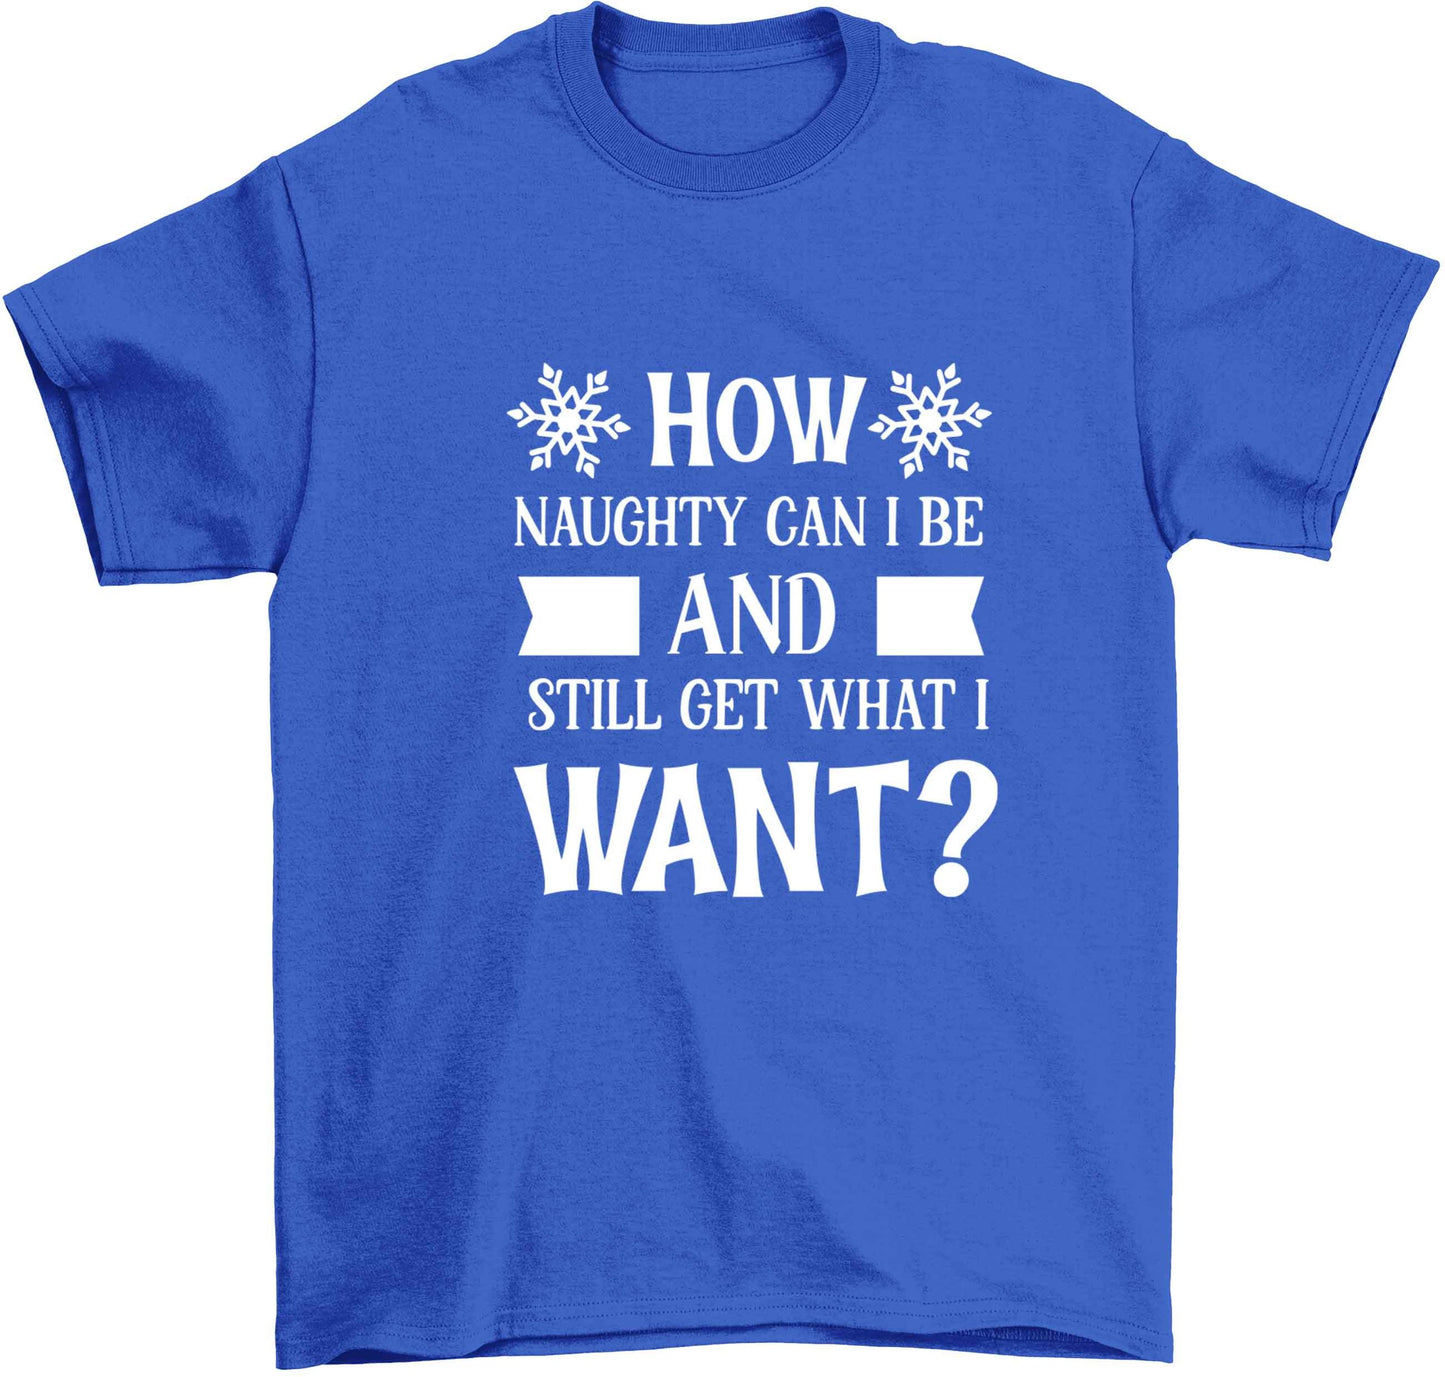 How naughty can I be and still get what I want? Children's blue Tshirt 12-13 Years